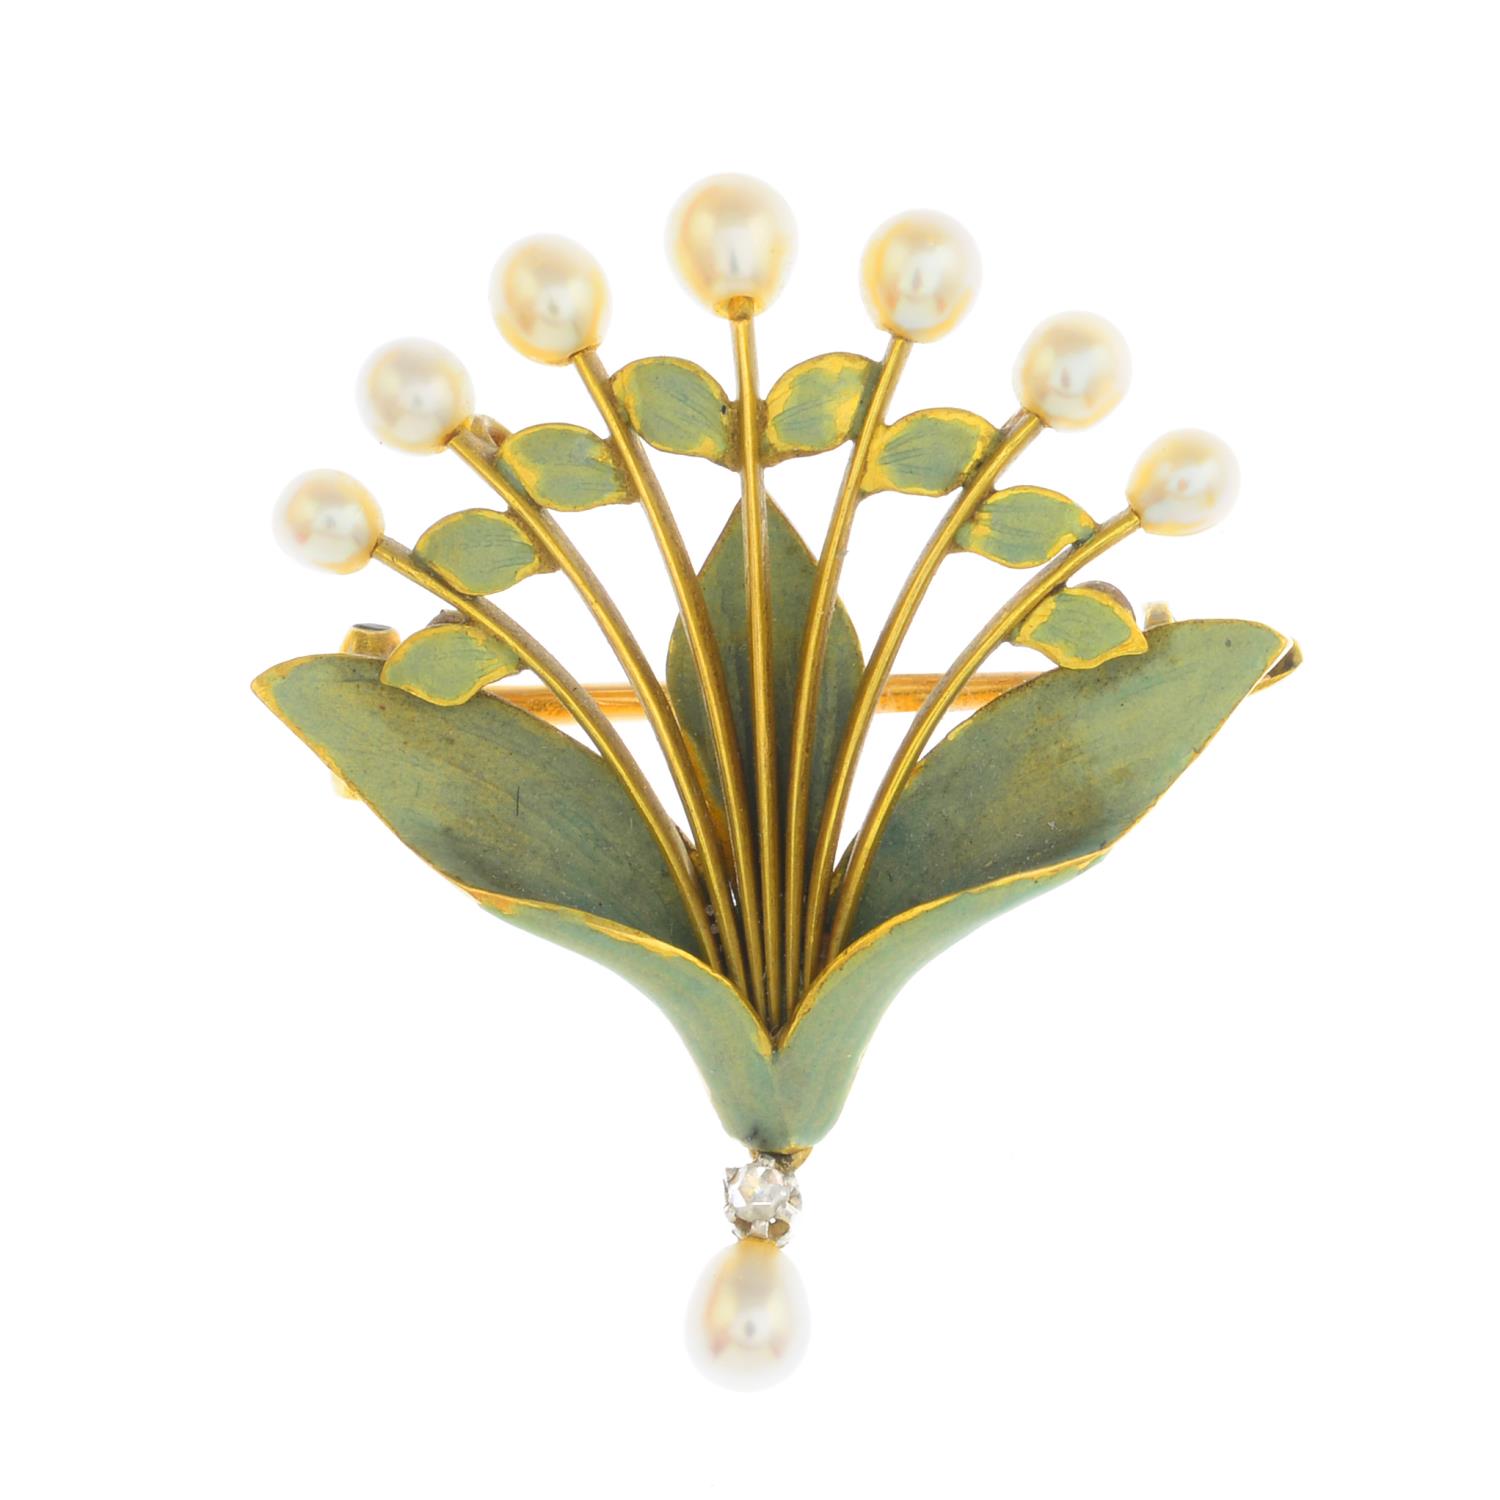 A. BEAUDOUIN- an early 20th century 18ct gold diamond cultured pearl and enamel brooch.